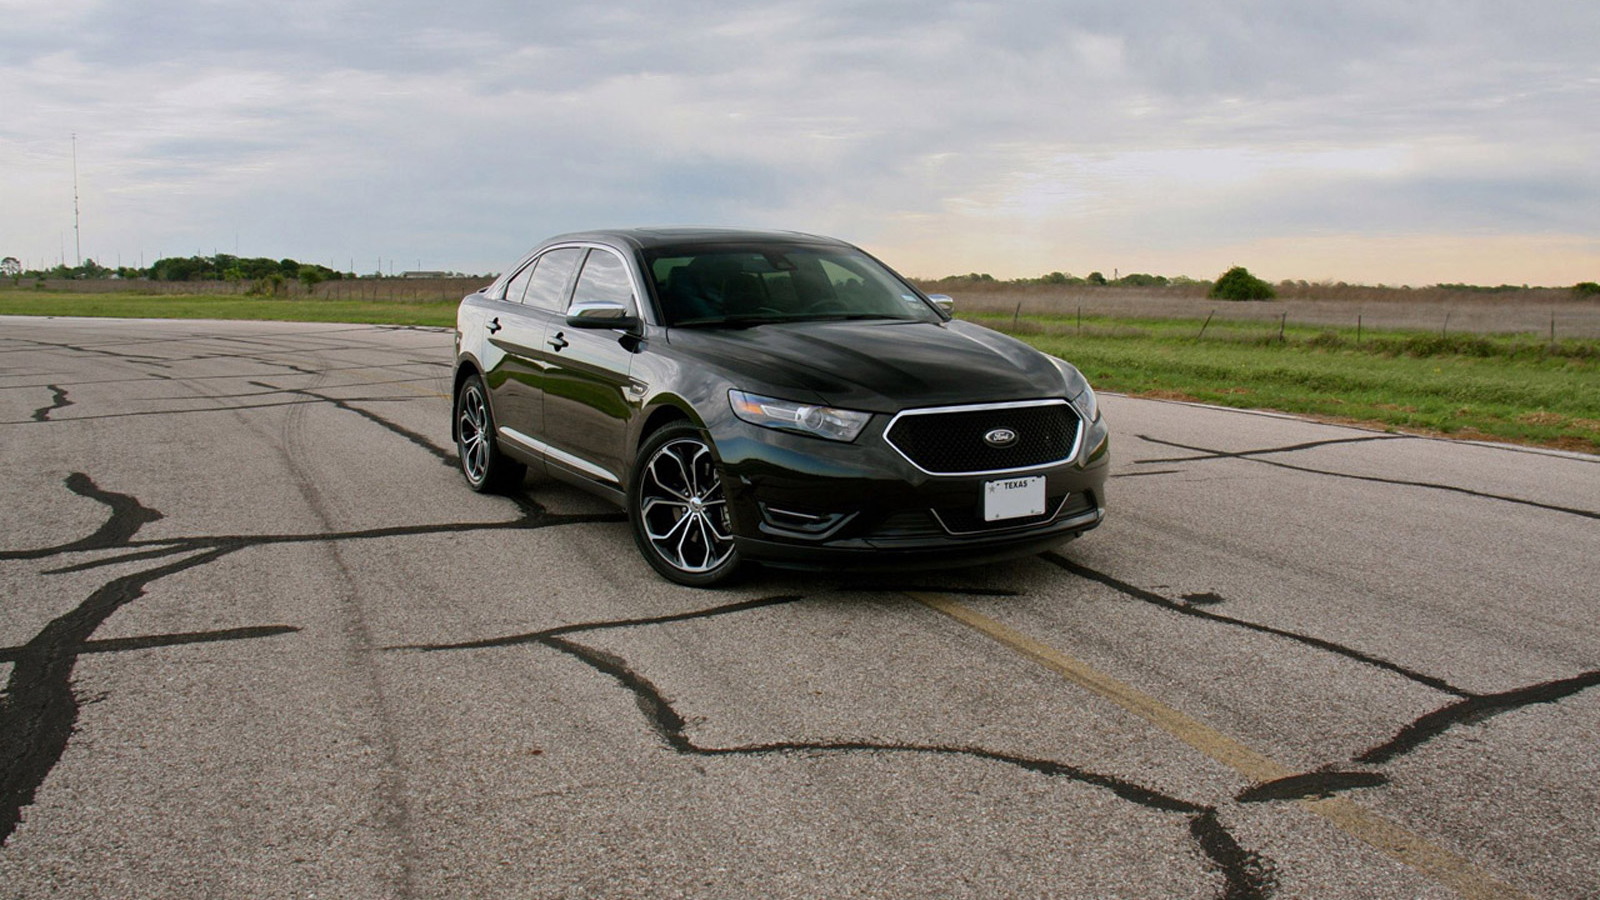 Hennessey-tuned 2013 Ford Taurus SHO